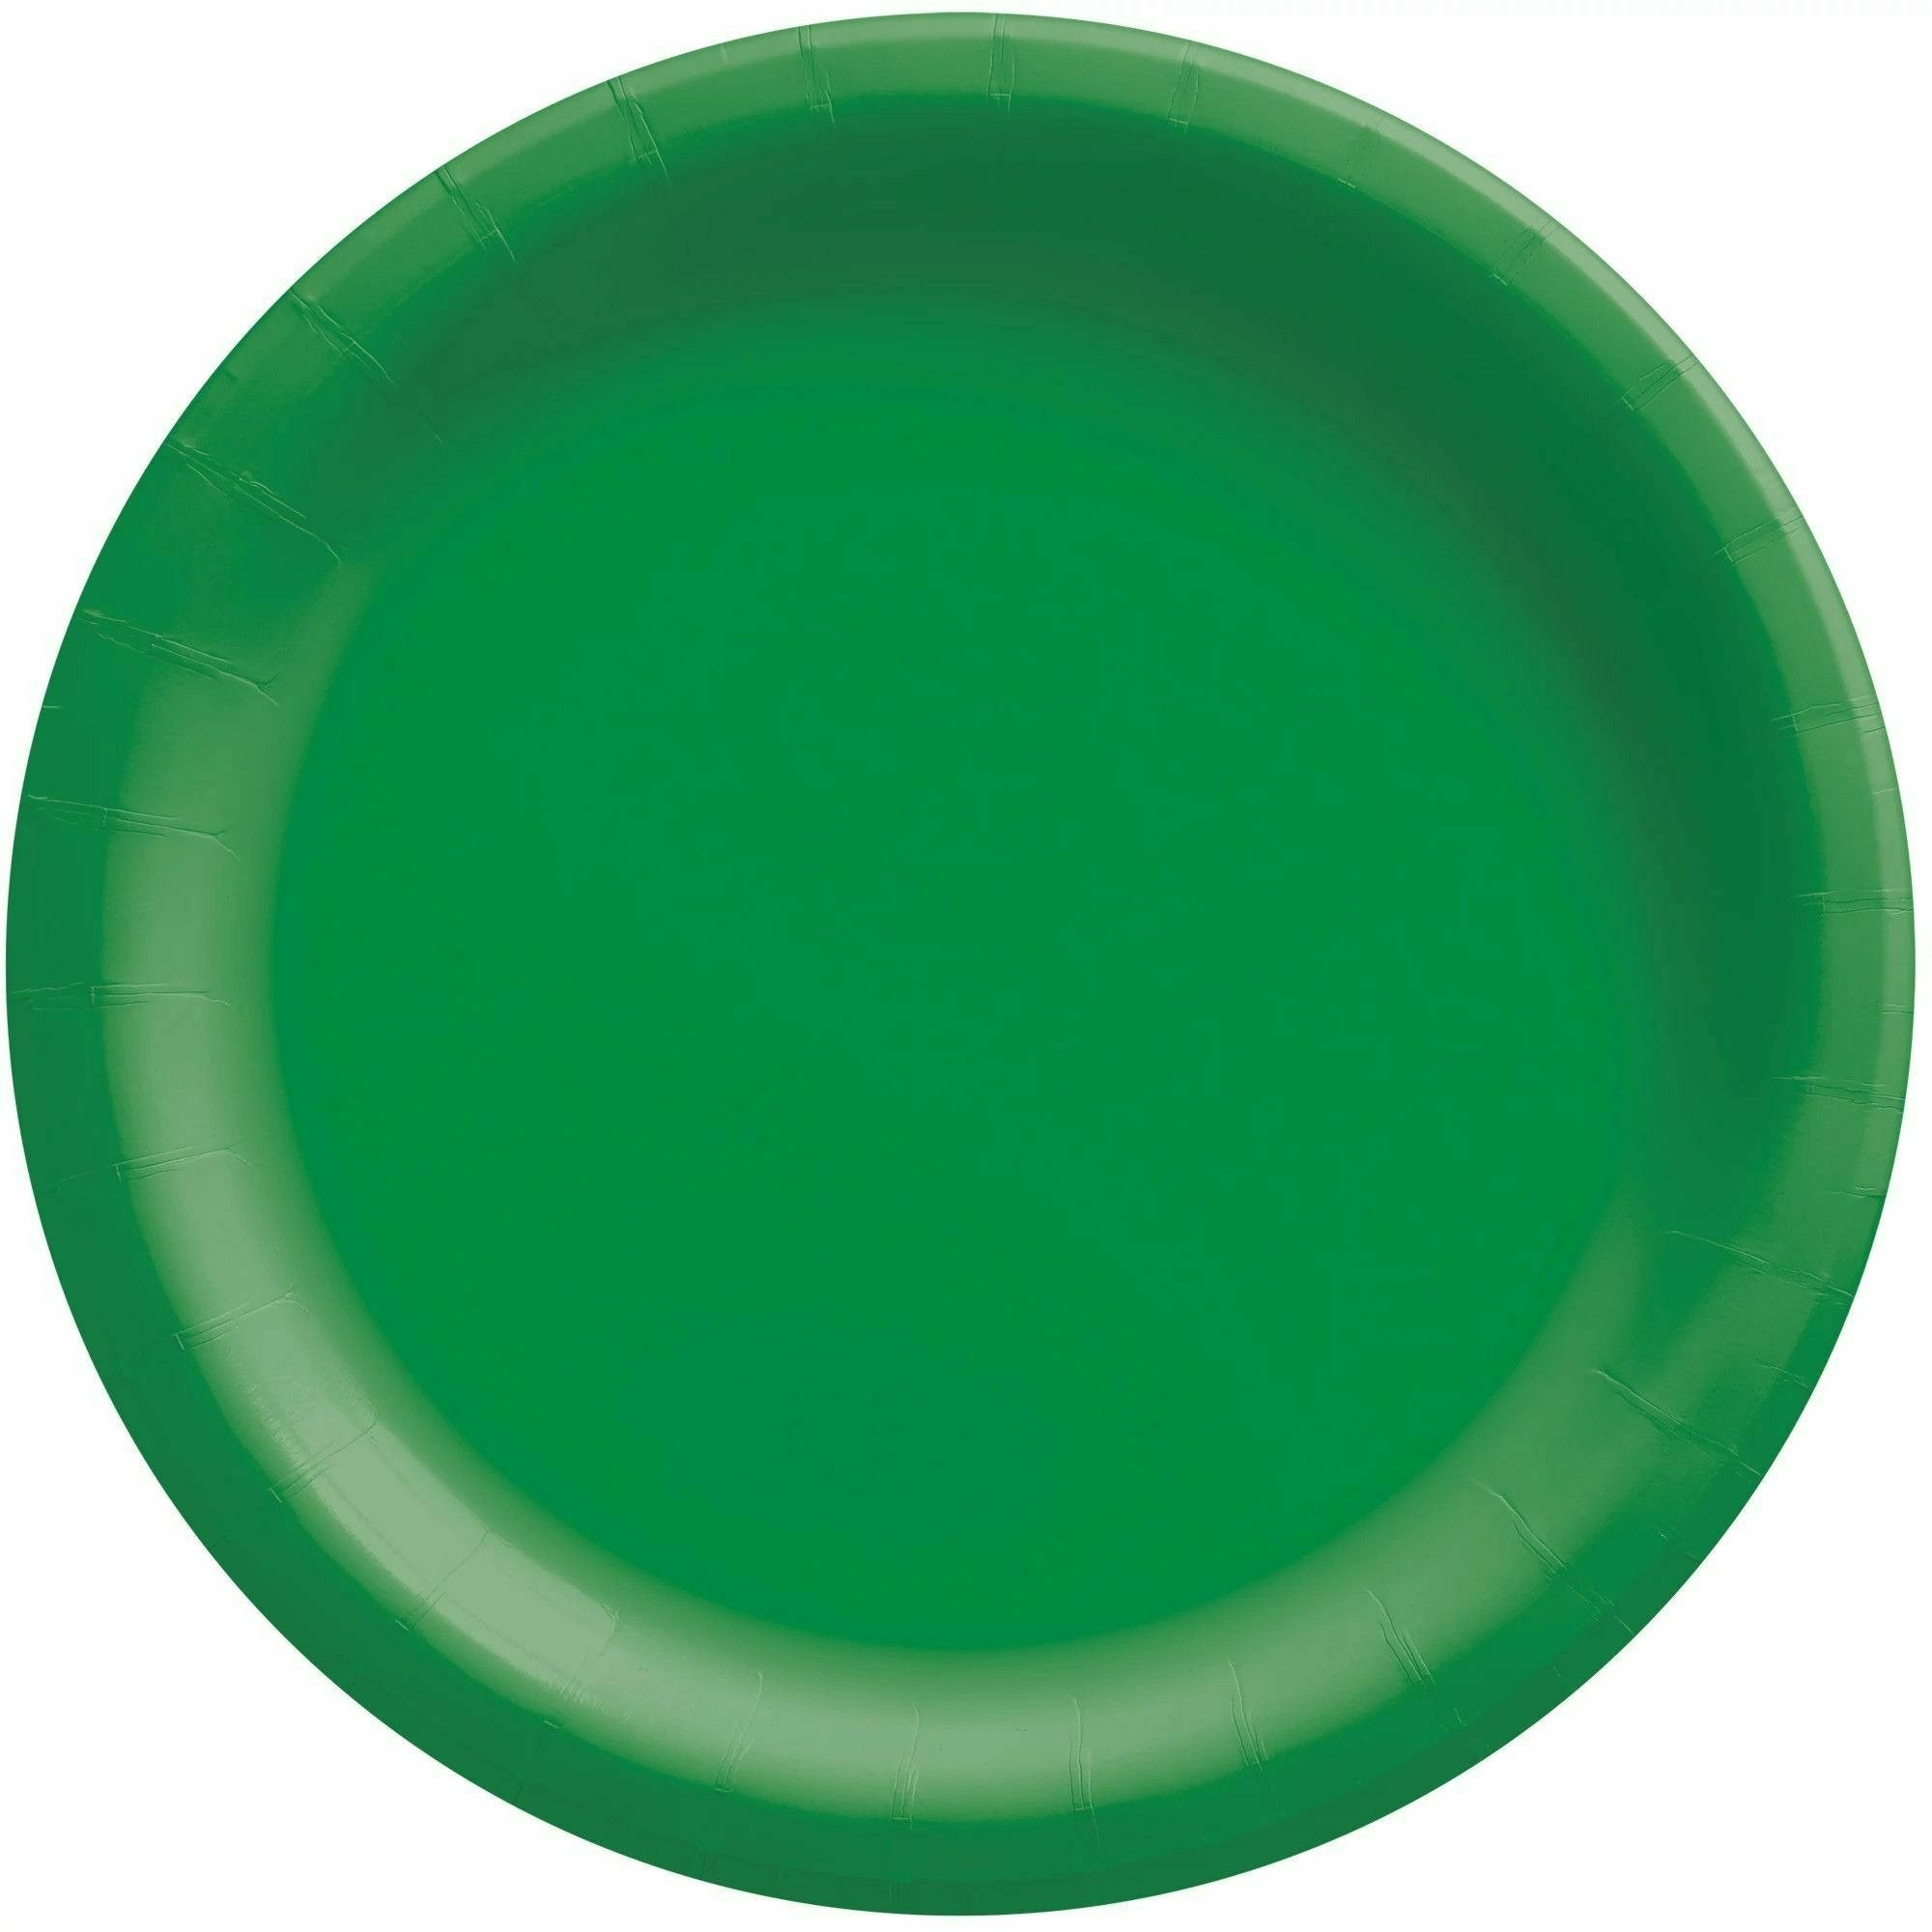 Amscan BASIC Festive Green - 8 1/2" Round Paper Plates, 50 Ct.